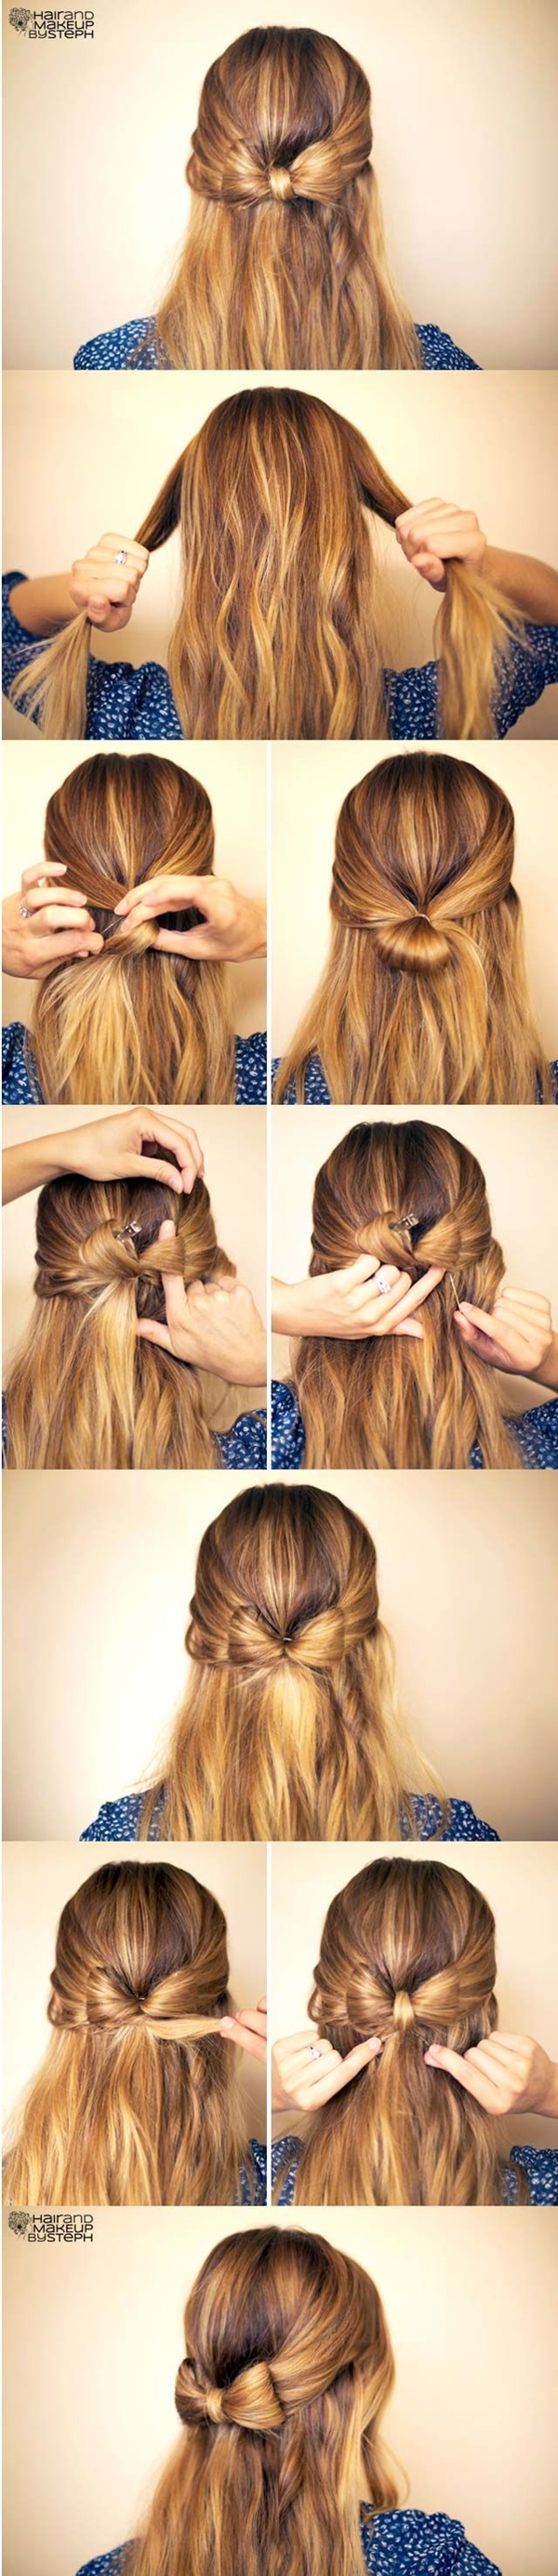 Simple Five Minute Hairstyles (50)